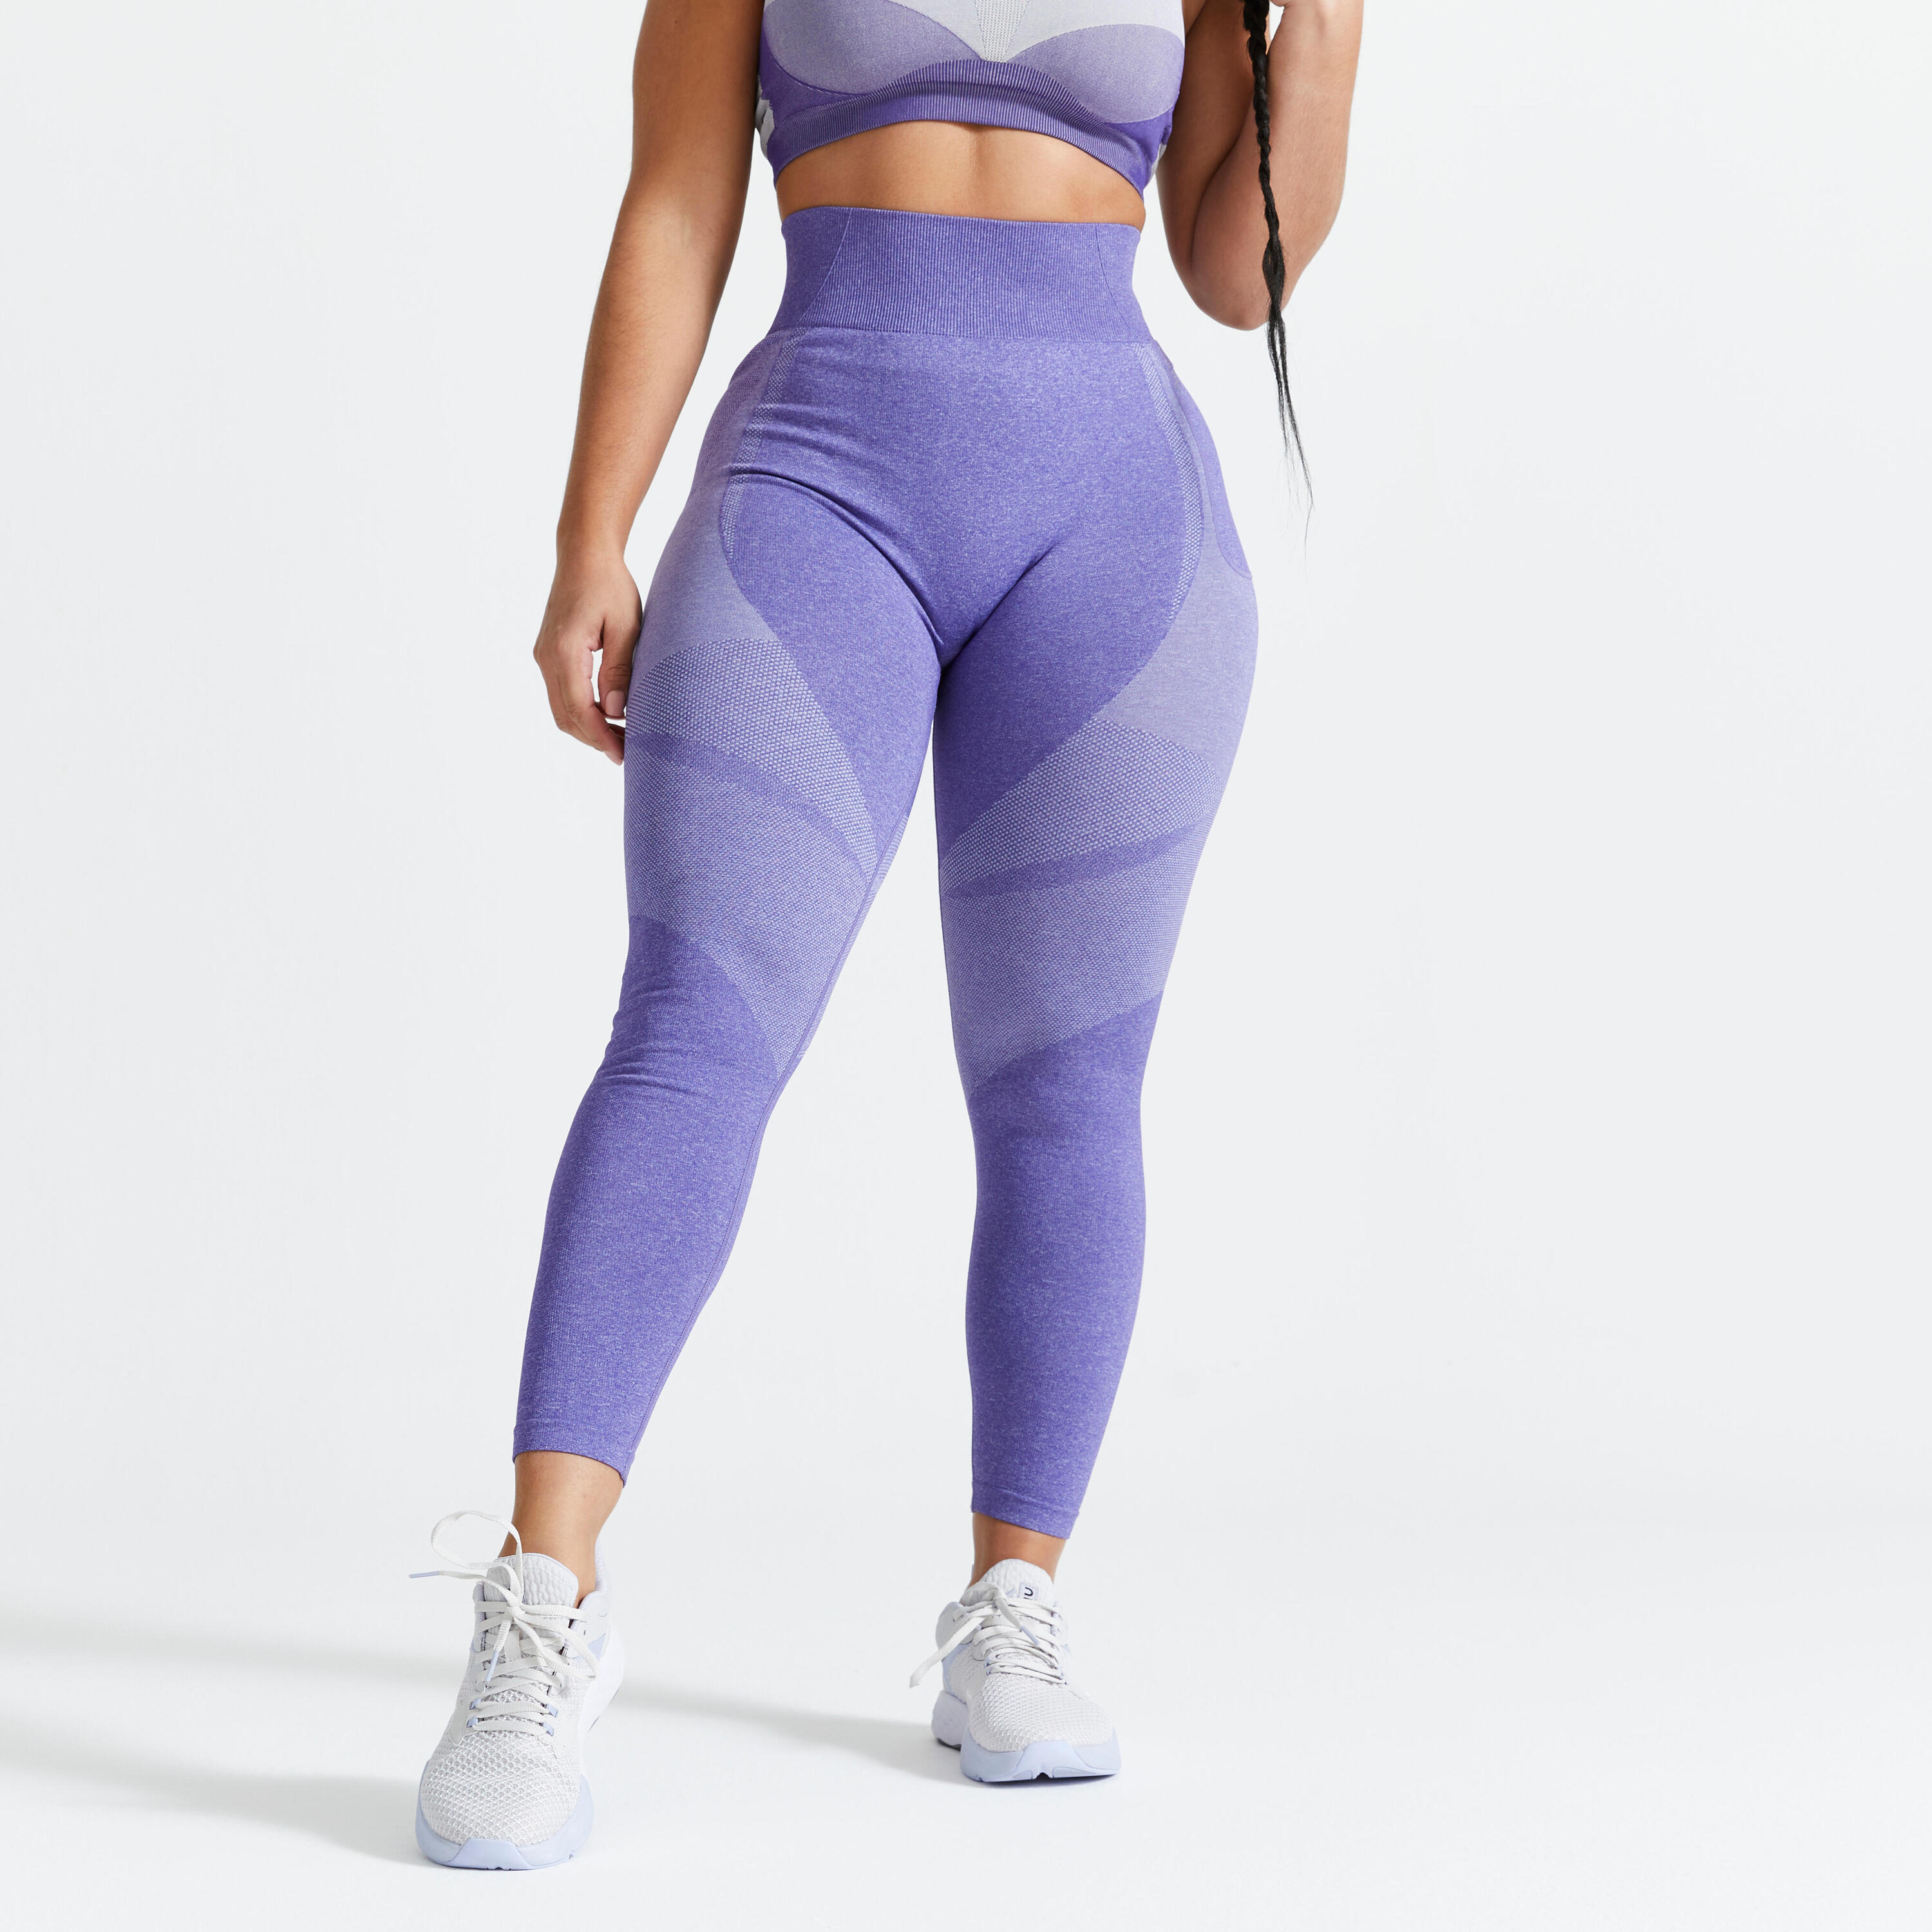 DOMYOS High-Waisted Seamless Fitness Leggings with Phone Pocket - Purple